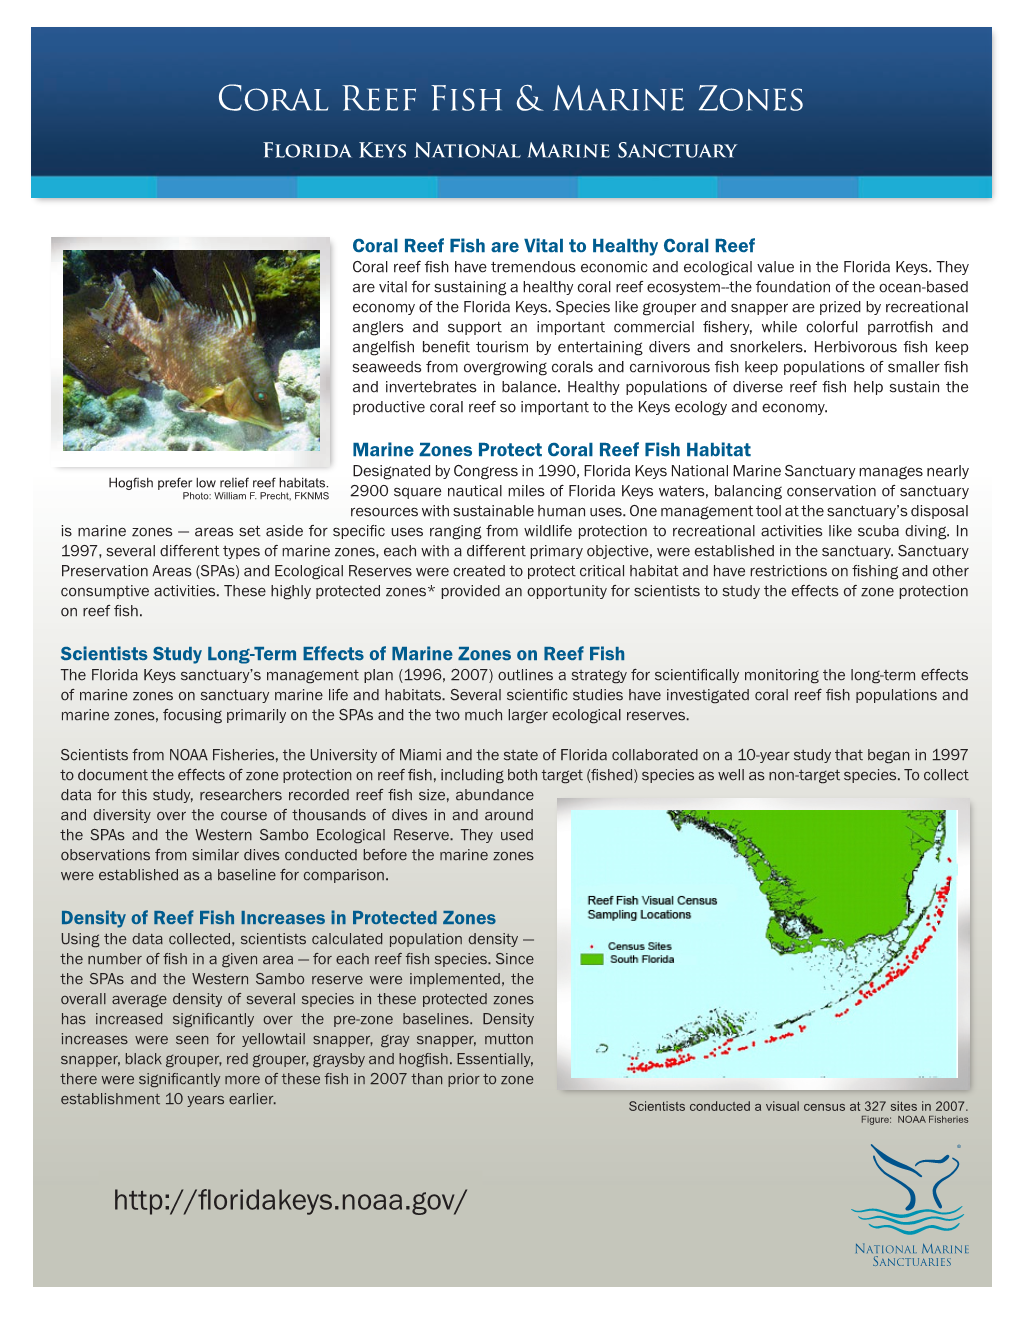 Coral Reef Fish and Marine Zones